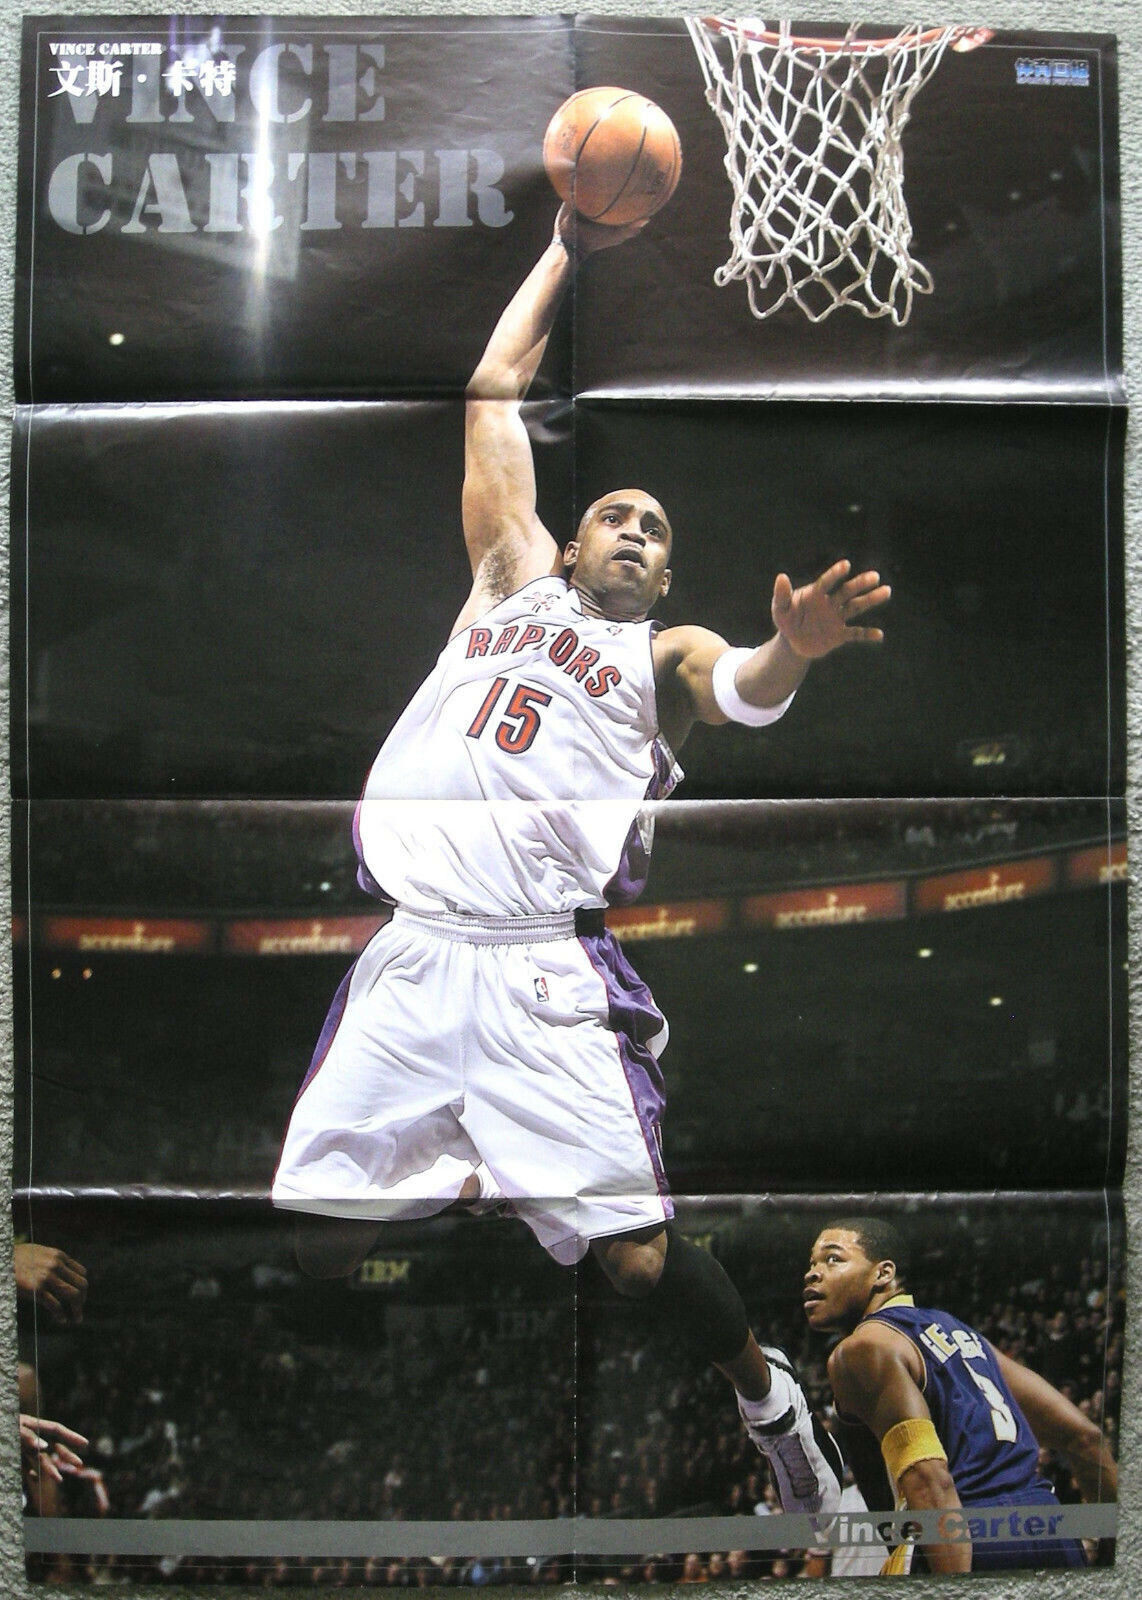 CHINA Poster - VINCE CARTER - NEW JERSEY NETS - Chinese Poster